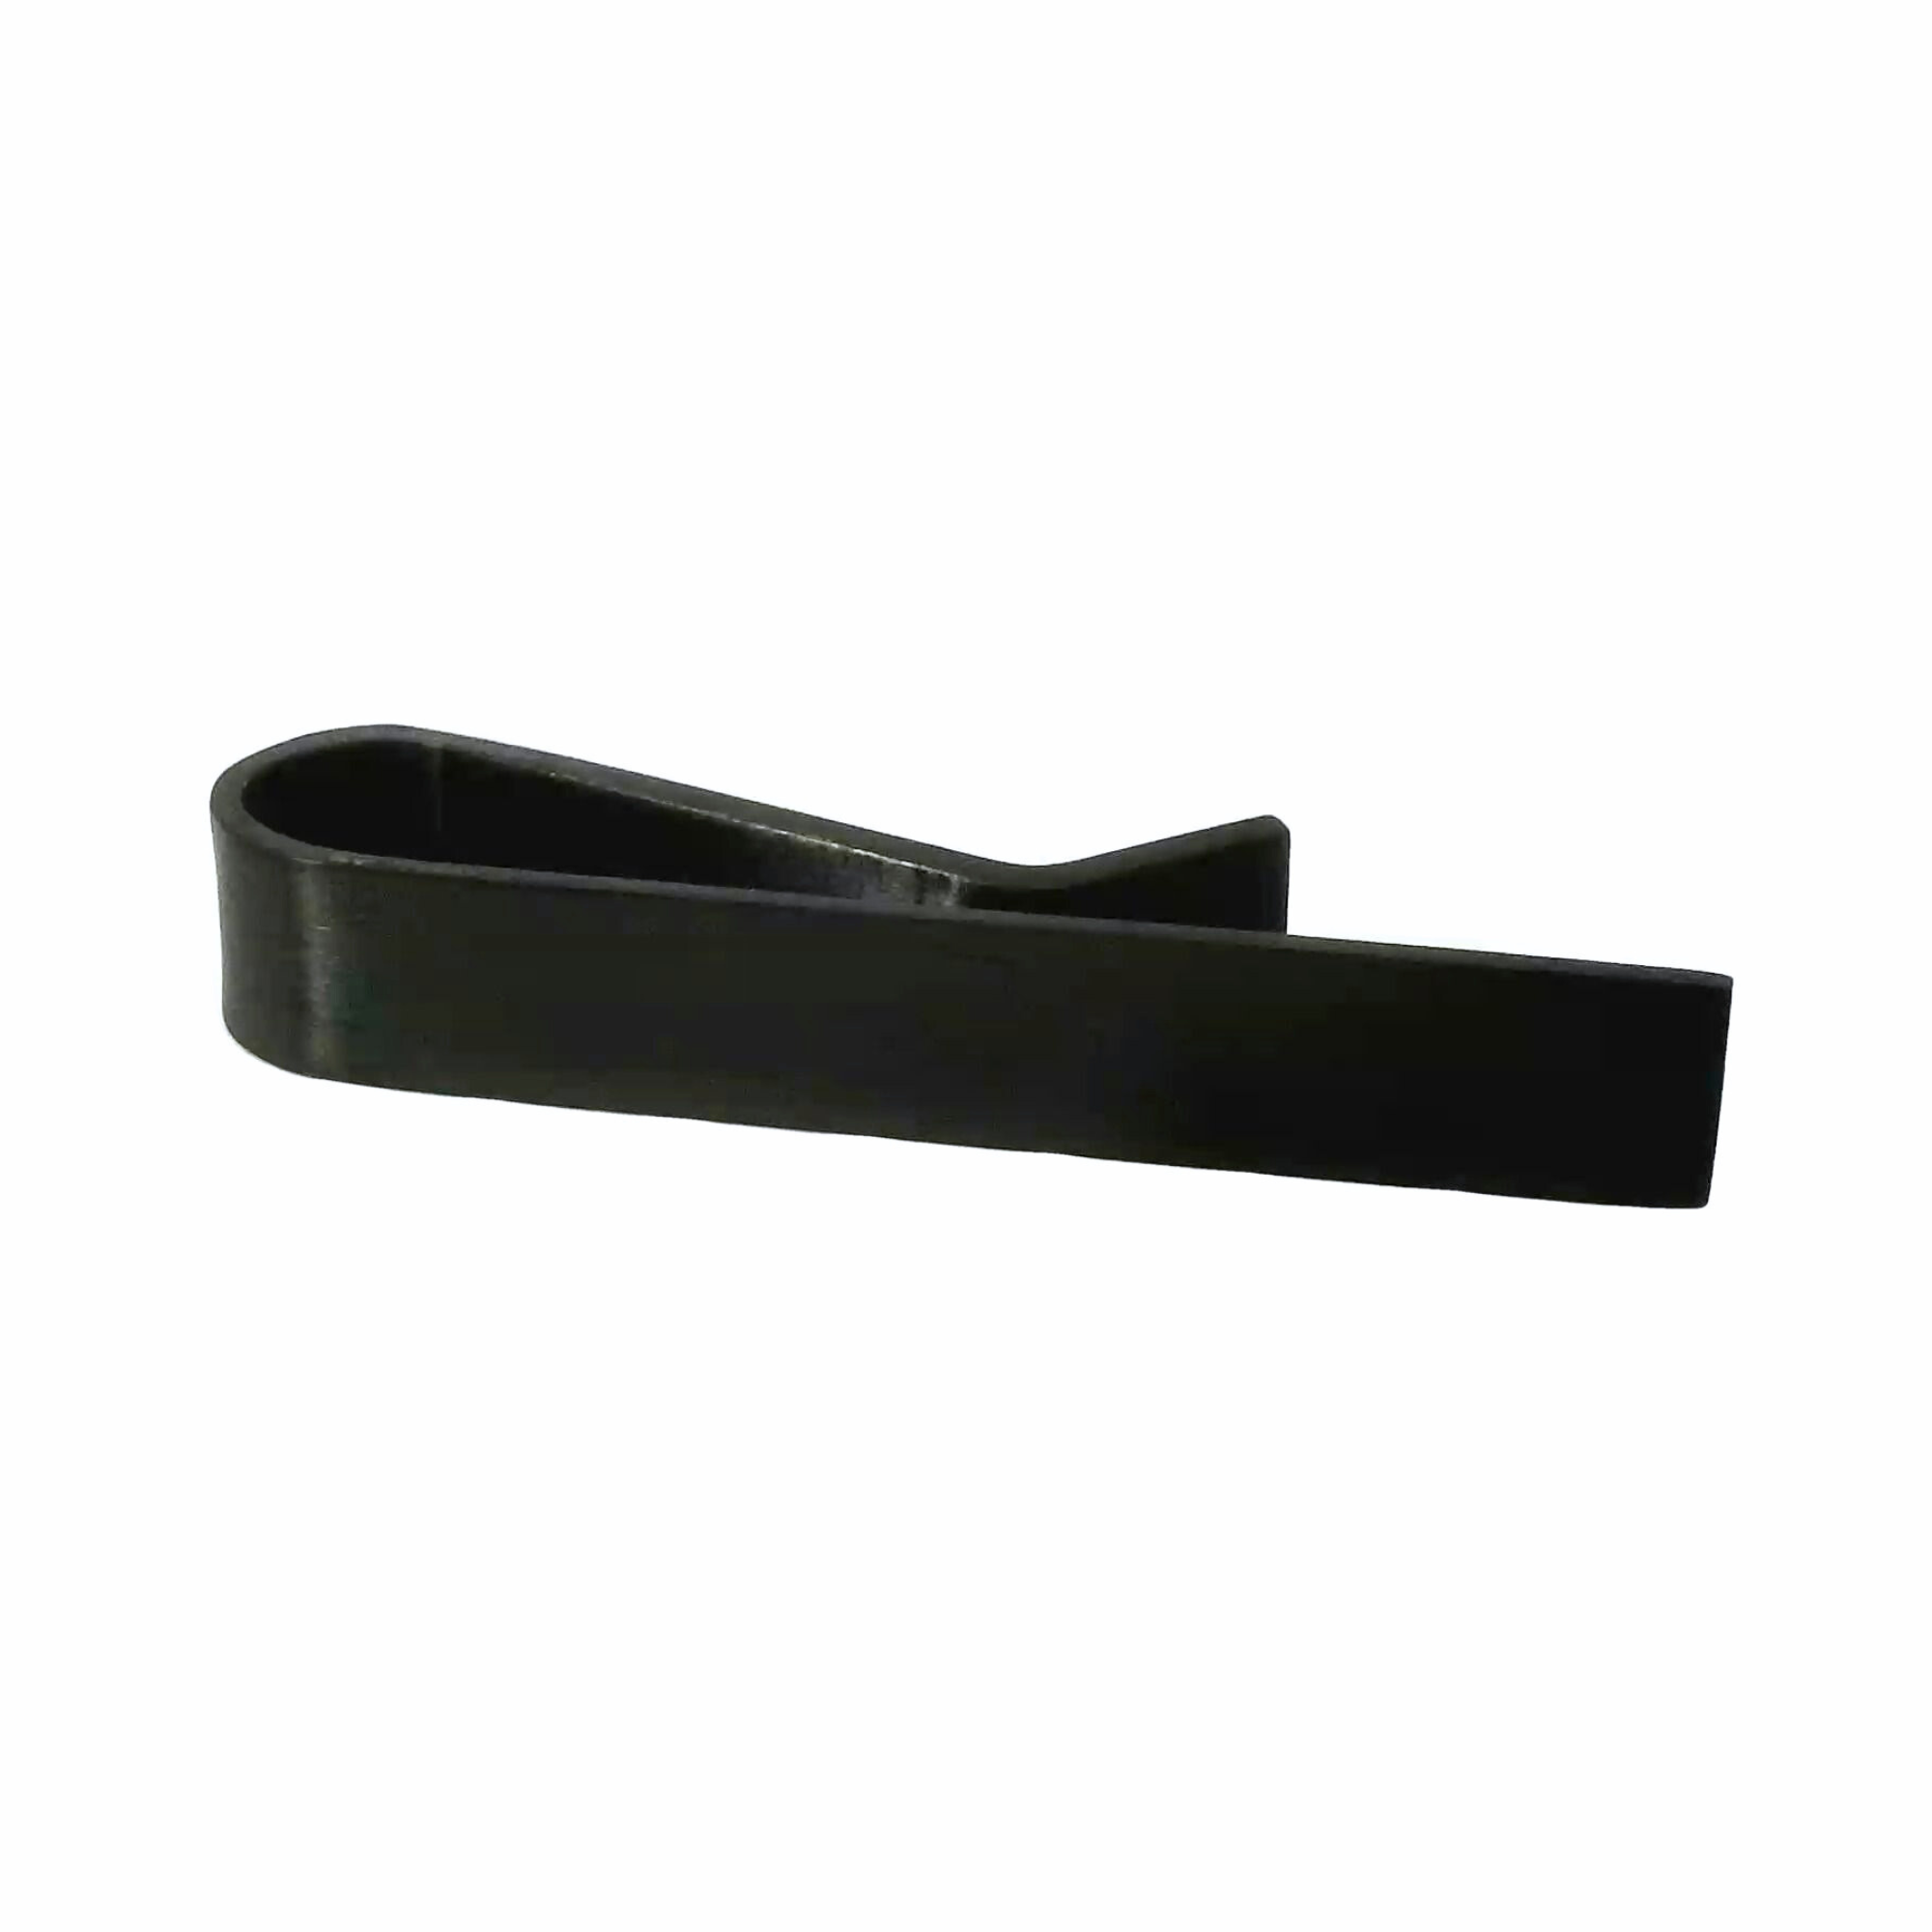 Small Brushed Black Tie Bar 40mm